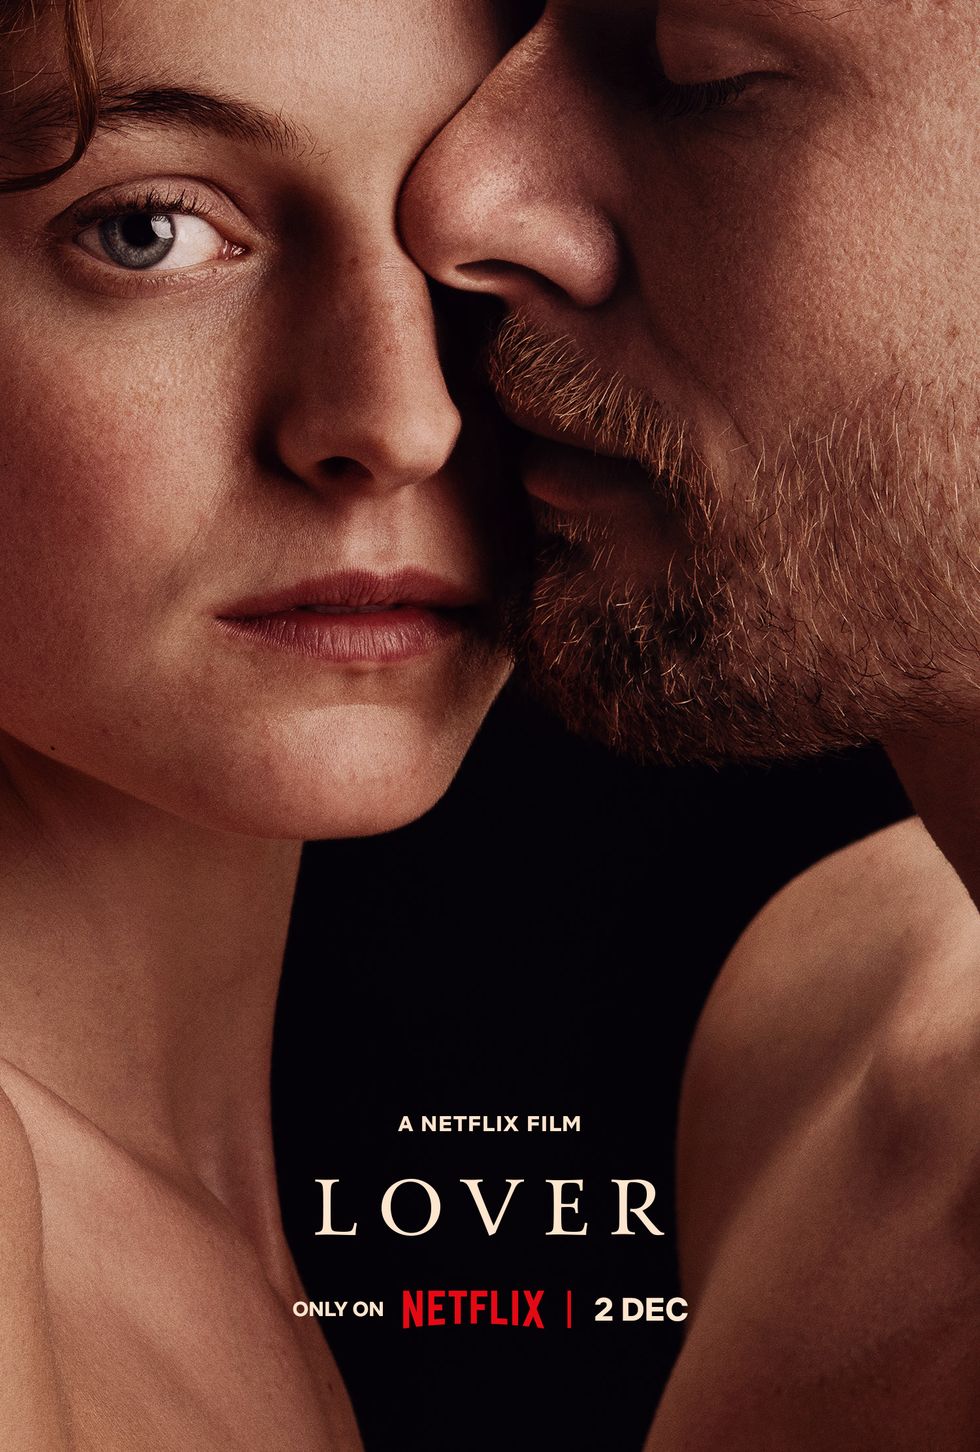 Lady Chatterley's Lover (2022)